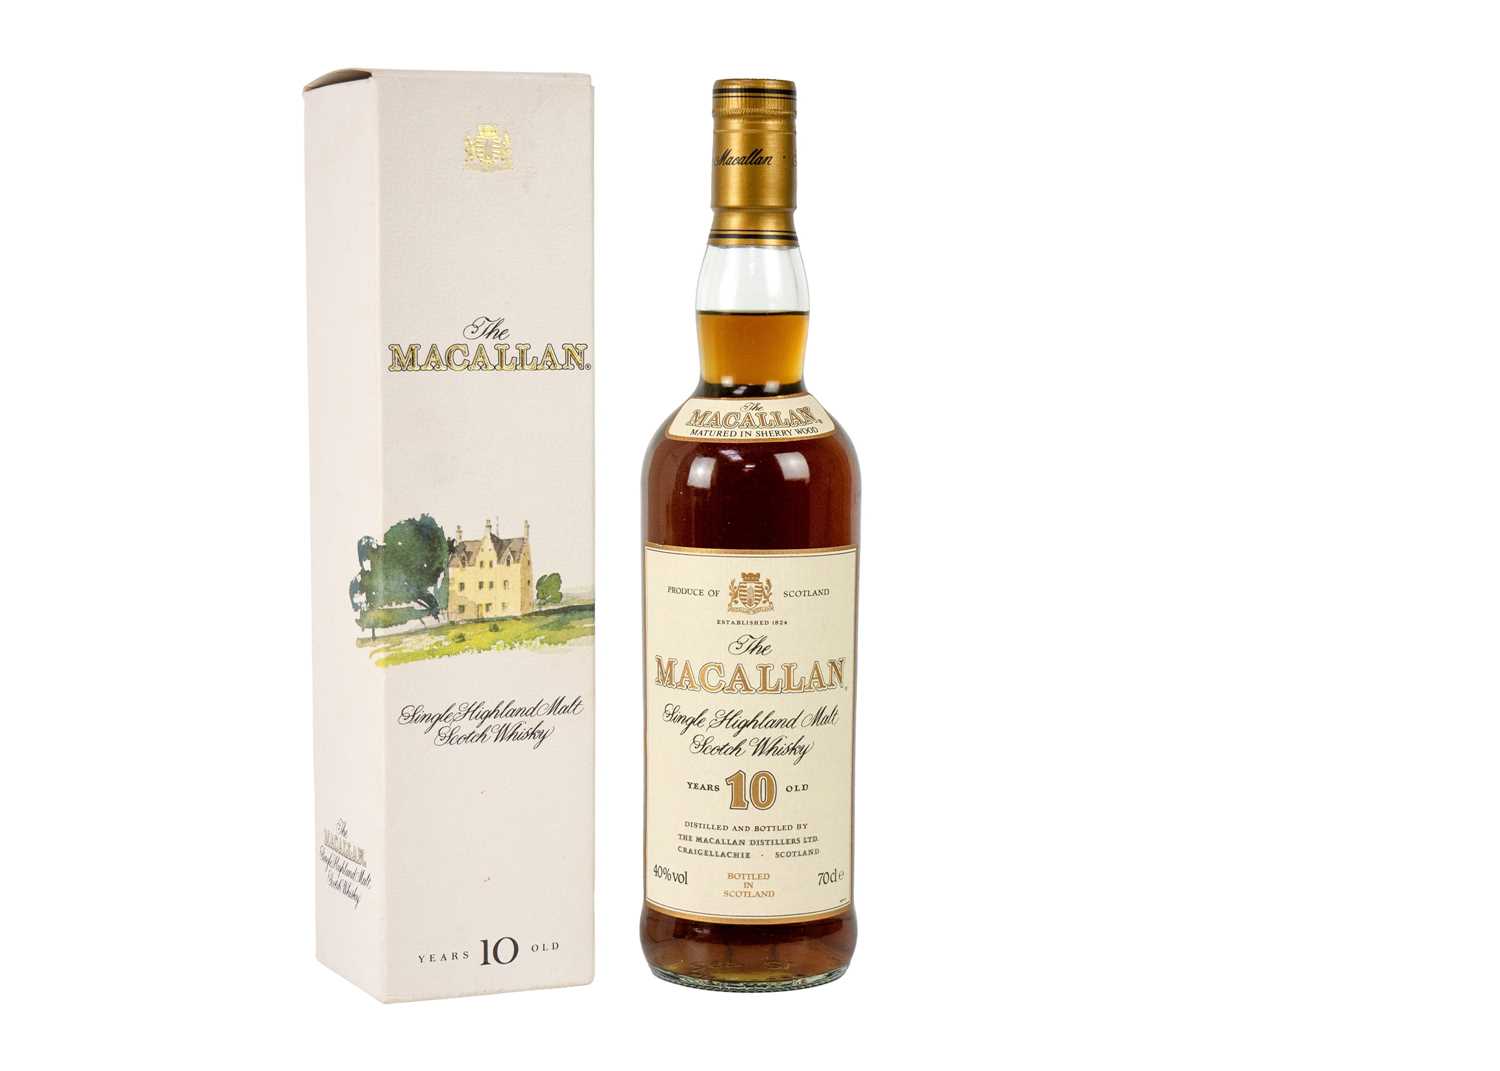 Macallan Whisky 10 years old. - Image 3 of 5